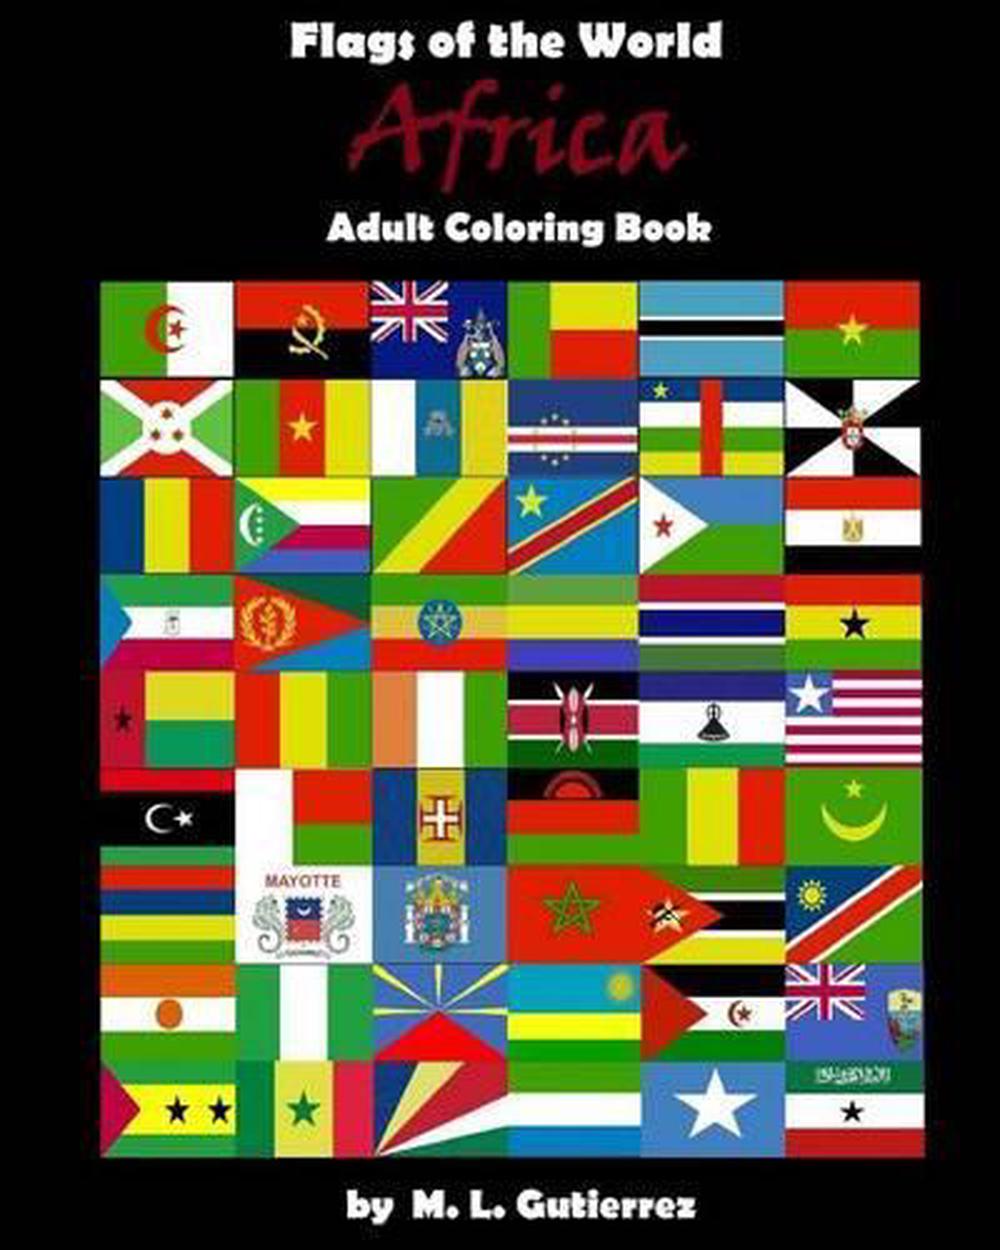 Flags of the World Series (Africa) Adult Coloring Book by M.L